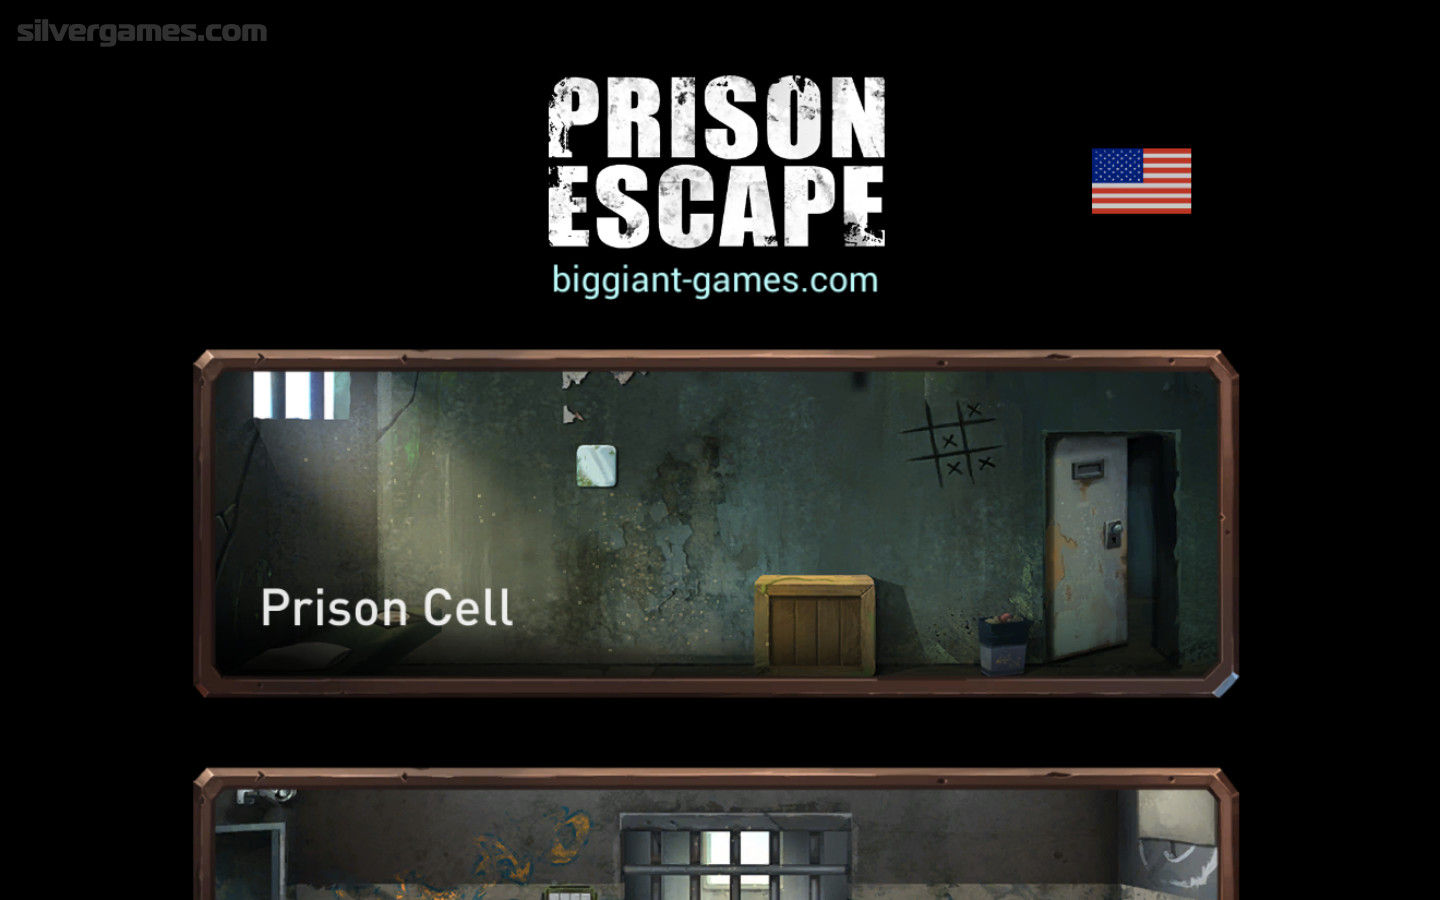 Escaping the Prison - 🕹️ Online Game